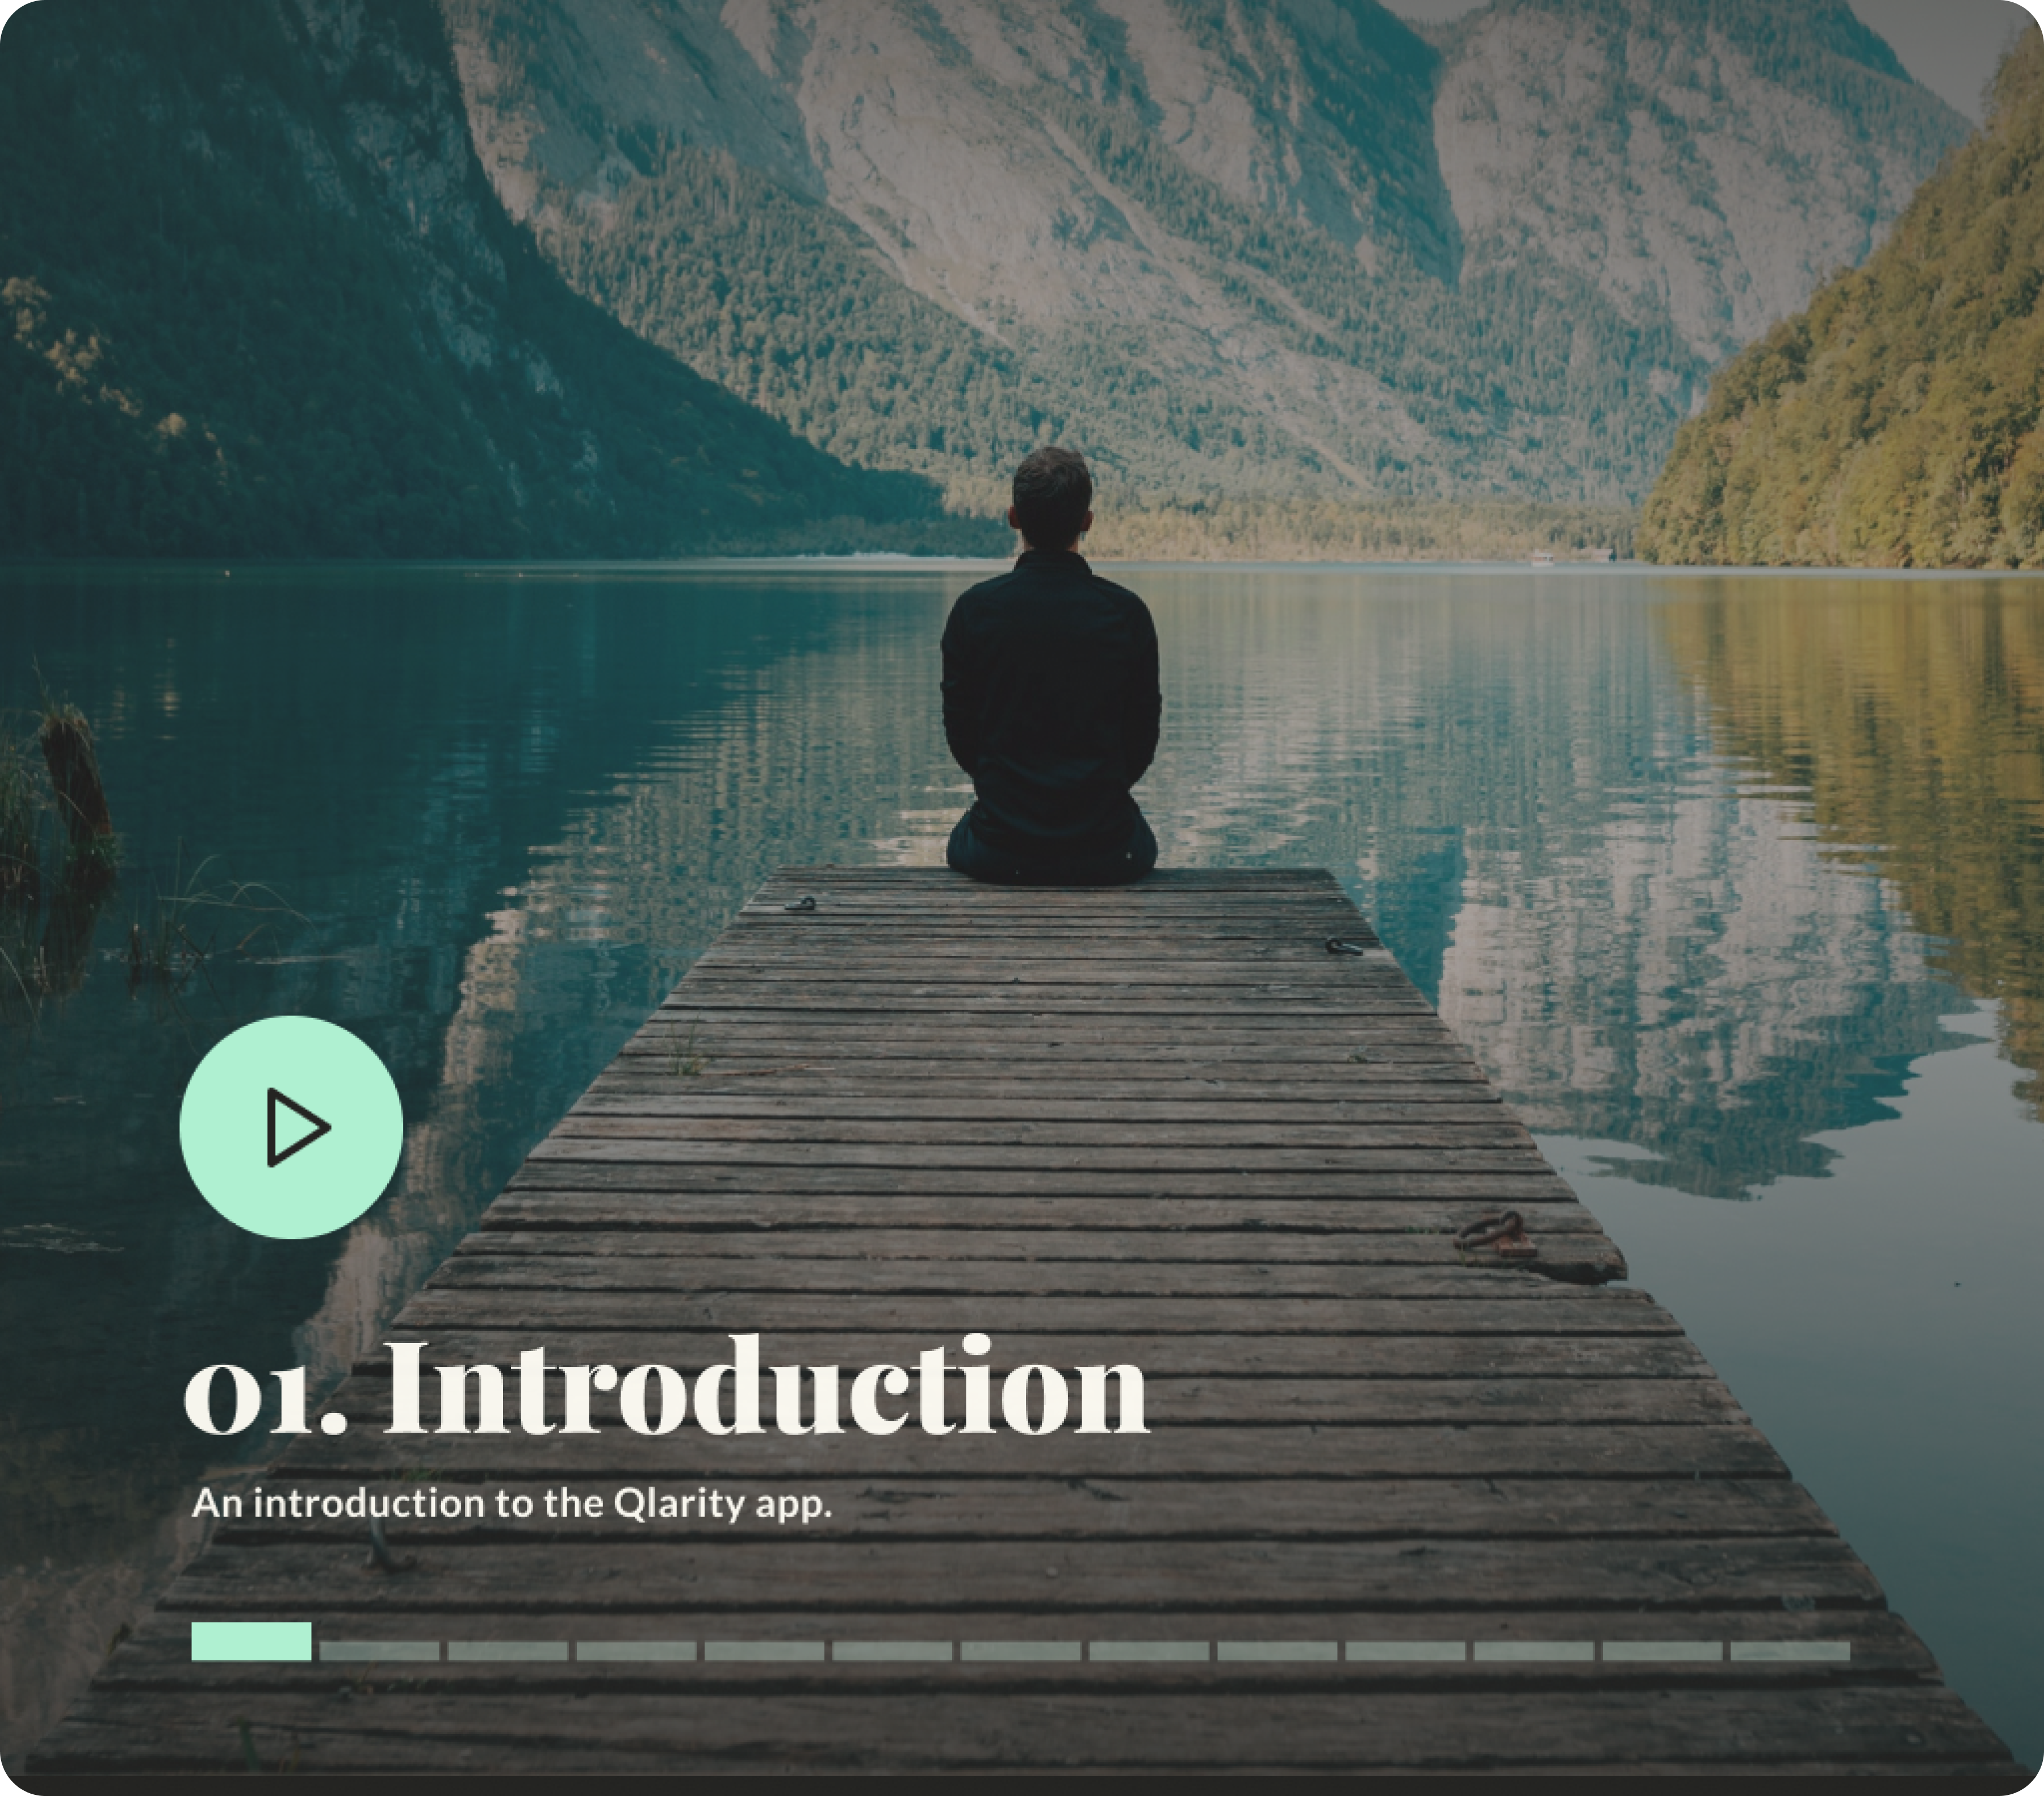 Introduction screen from Qlarity mobile mindfulness app for adolescents.